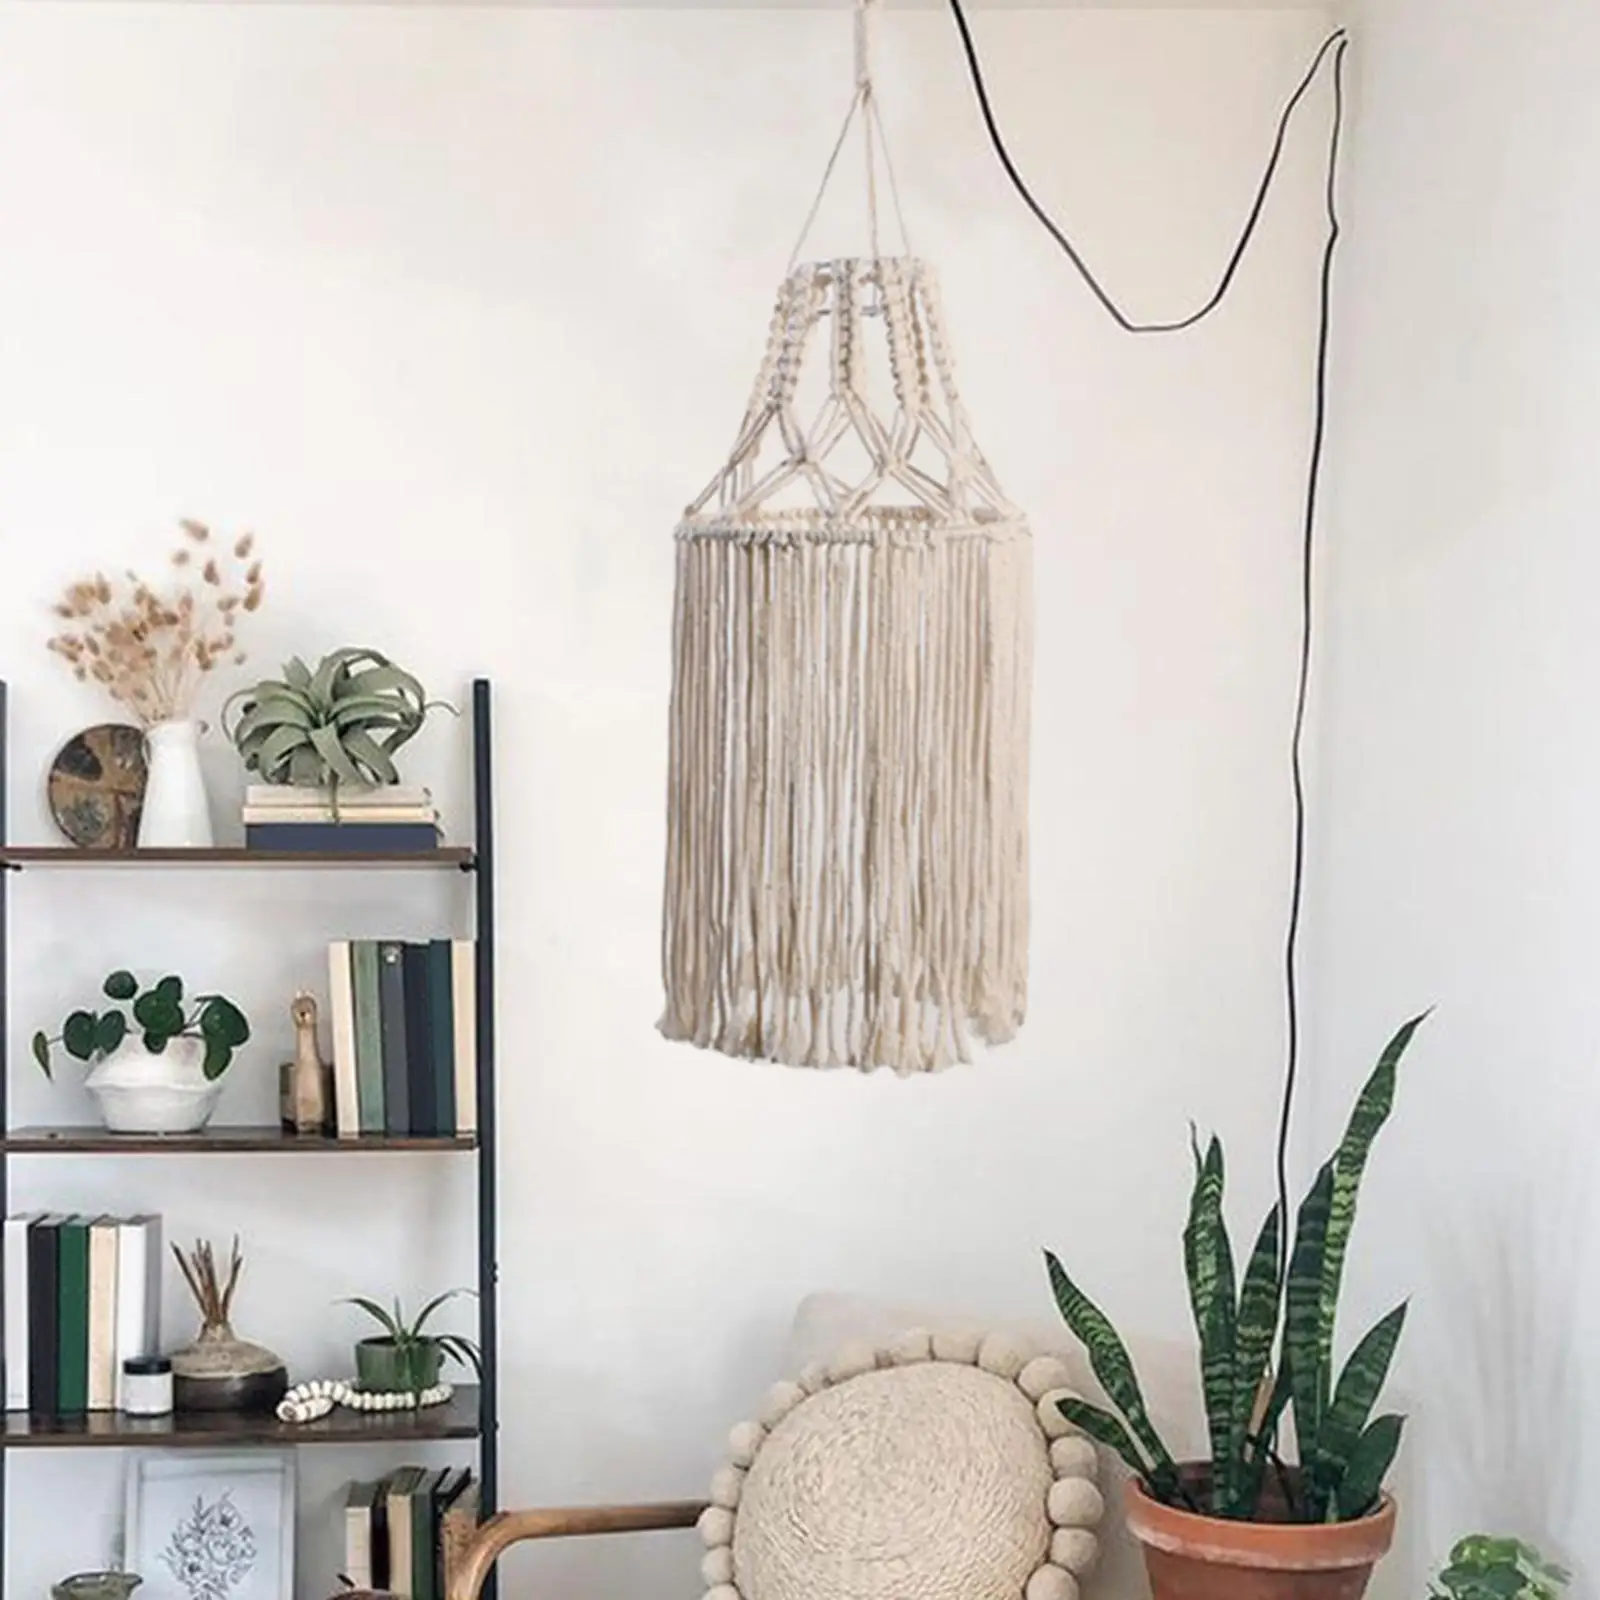 Bohemian Macrame Ceiling Lamp Shade Hanging Light Cover Tapestry Handwoven Lampshade for Office Dorm Home Decor Bedroom